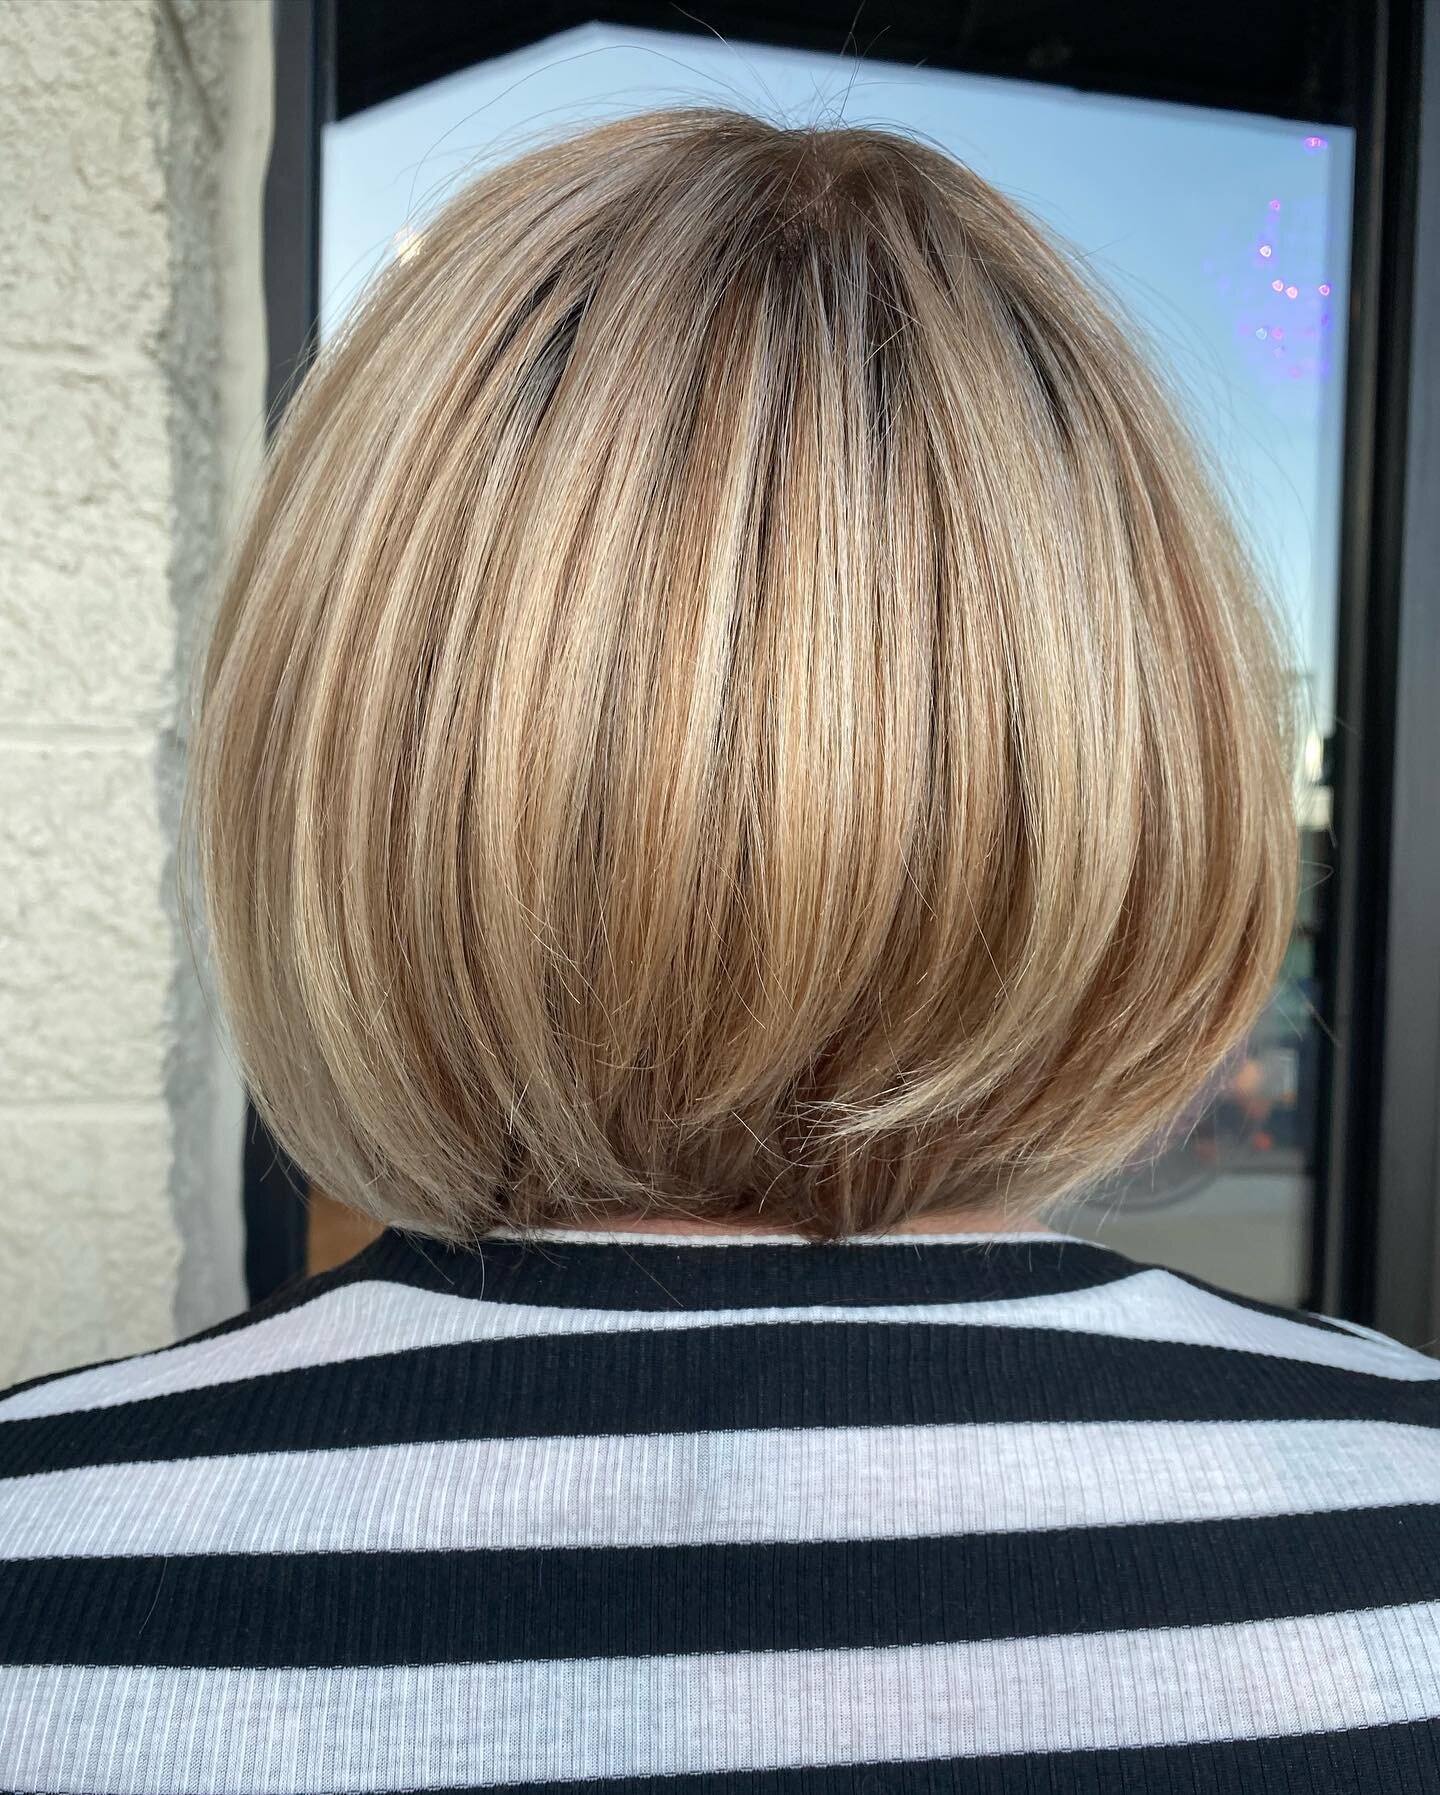 Full head of baby lights
.
.
.
This is a color technique that is heavily highlighted giving her a softer grow out 💛 and getting her blonder each visit!
#babylights 
#pulpriotblondeaf #pulpriotlightener 
#healthyhairmatters 
#blondehair #highlightedh